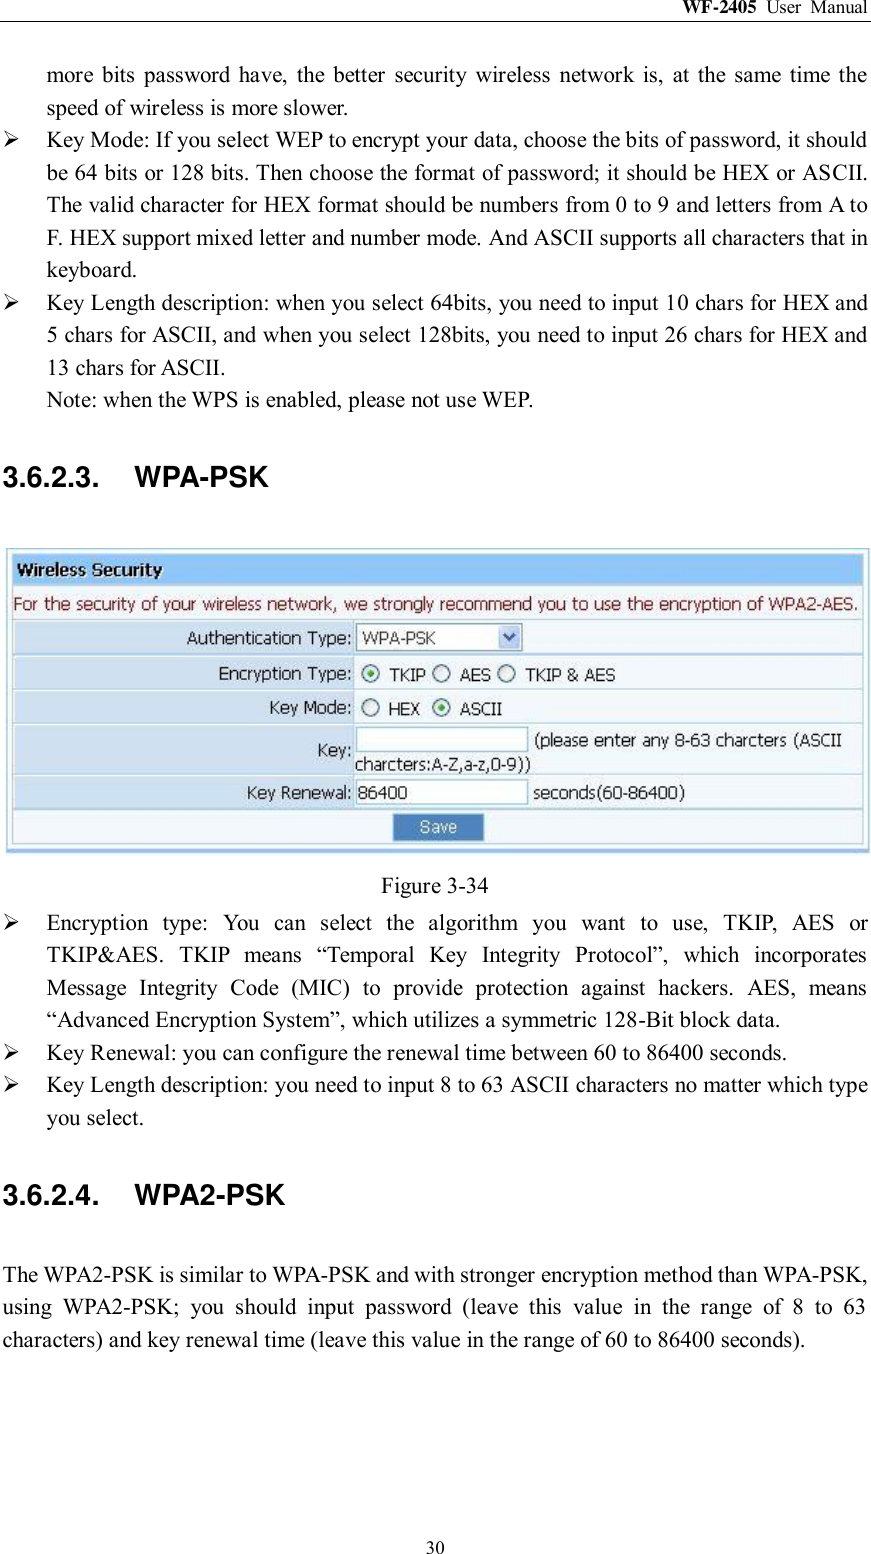 WF-2405  User  Manual  30 more  bits  password  have,  the  better  security  wireless  network  is,  at  the  same  time  the speed of wireless is more slower.  Key Mode: If you select WEP to encrypt your data, choose the bits of password, it should be 64 bits or 128 bits. Then choose the format of password; it should be HEX or ASCII. The valid character for HEX format should be numbers from 0 to 9 and letters from A to F. HEX support mixed letter and number mode. And ASCII supports all characters that in keyboard.  Key Length description: when you select 64bits, you need to input 10 chars for HEX and 5 chars for ASCII, and when you select 128bits, you need to input 26 chars for HEX and 13 chars for ASCII. Note: when the WPS is enabled, please not use WEP. 3.6.2.3.  WPA-PSK  Figure 3-34  Encryption  type:  You  can  select  the  algorithm  you  want  to  use,  TKIP,  AES  or TKIP&amp;AES.  TKIP  means  “Temporal  Key  Integrity  Protocol”,  which  incorporates Message  Integrity  Code  (MIC)  to  provide  protection  against  hackers.  AES,  means “Advanced Encryption System”, which utilizes a symmetric 128-Bit block data.  Key Renewal: you can configure the renewal time between 60 to 86400 seconds.  Key Length description: you need to input 8 to 63 ASCII characters no matter which type you select. 3.6.2.4.  WPA2-PSK The WPA2-PSK is similar to WPA-PSK and with stronger encryption method than WPA-PSK, using  WPA2-PSK;  you  should  input  password  (leave  this  value  in  the  range  of  8  to  63 characters) and key renewal time (leave this value in the range of 60 to 86400 seconds). 